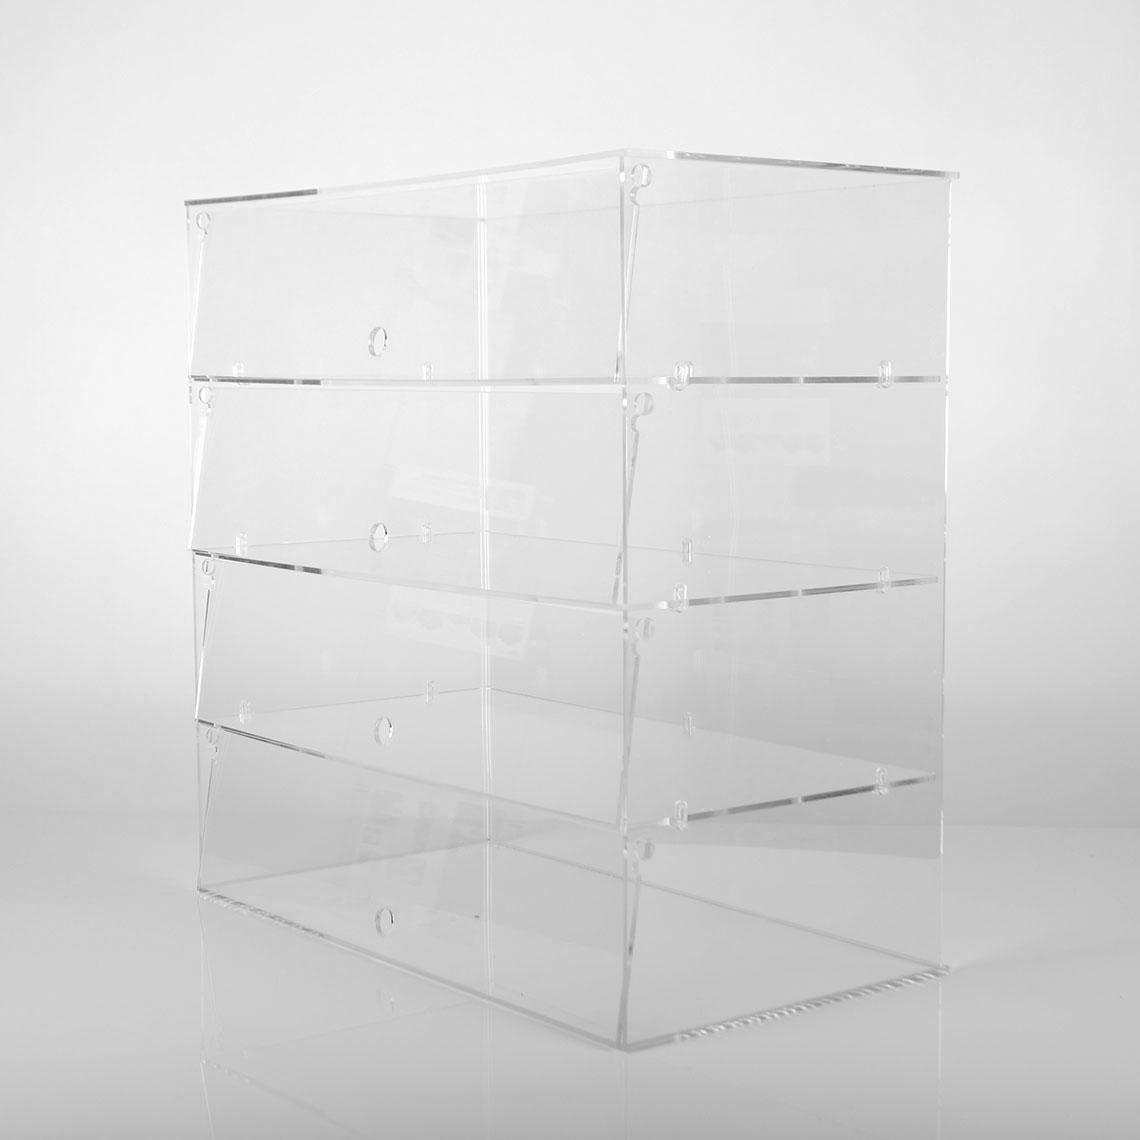 CAKE DISPLAY CABINET COLD 1200W 3 TIER • Suncoast Catering Equipment